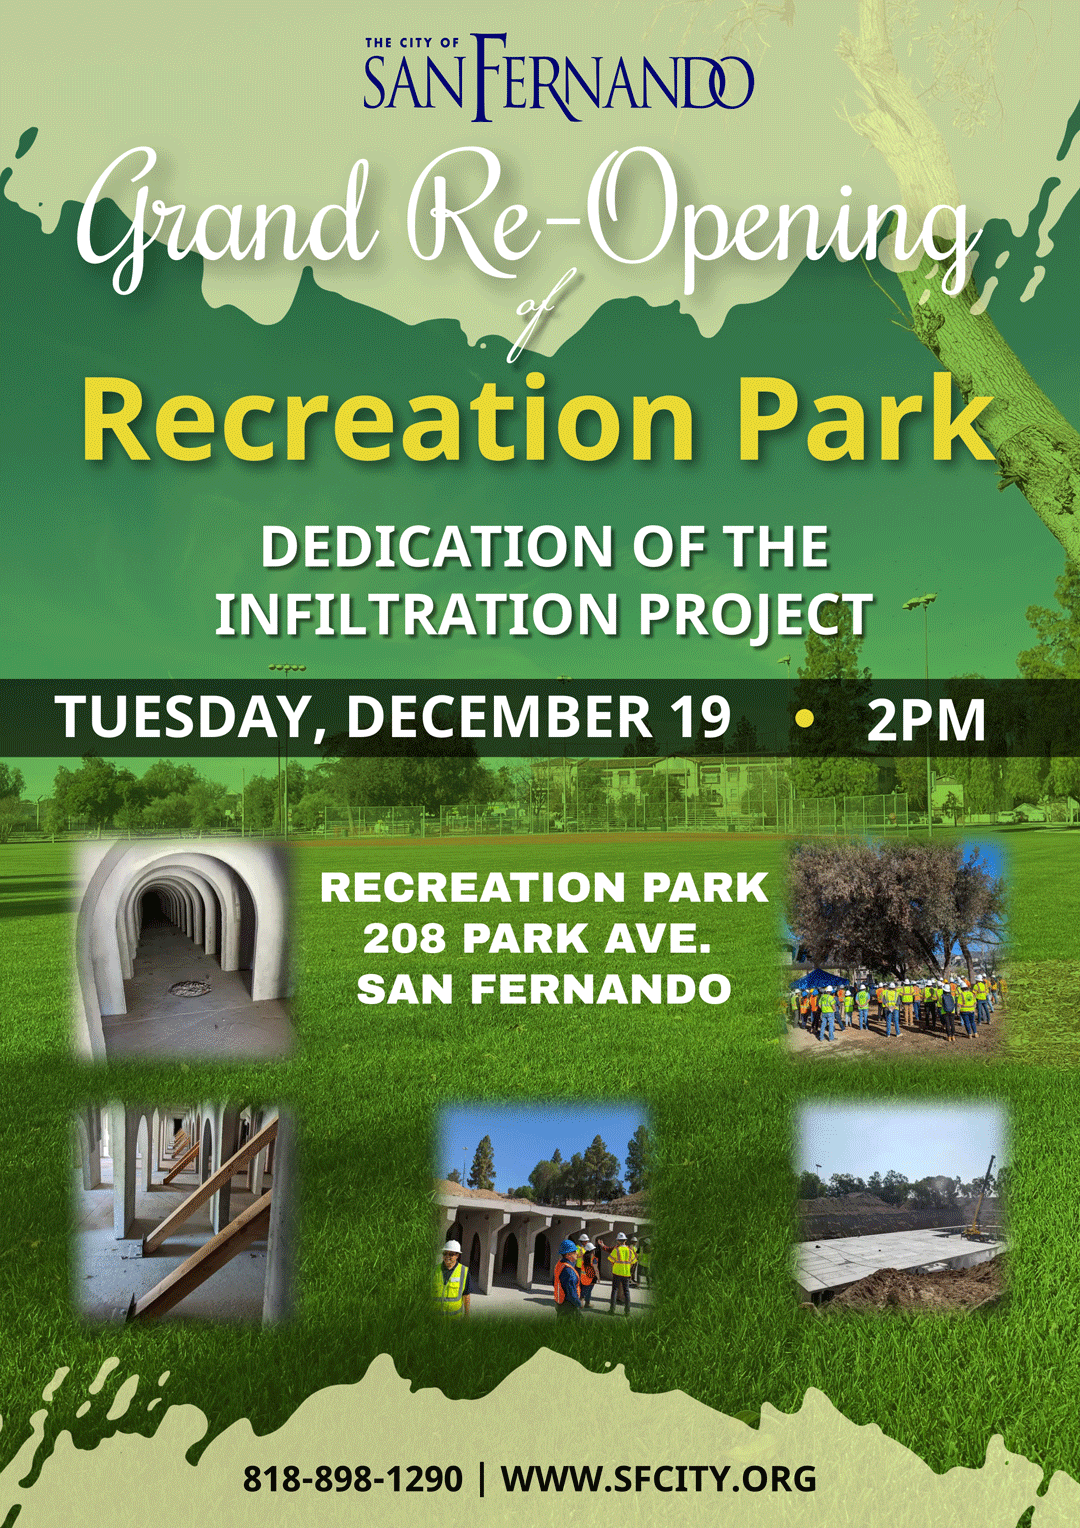 Re-opening Recreation Park